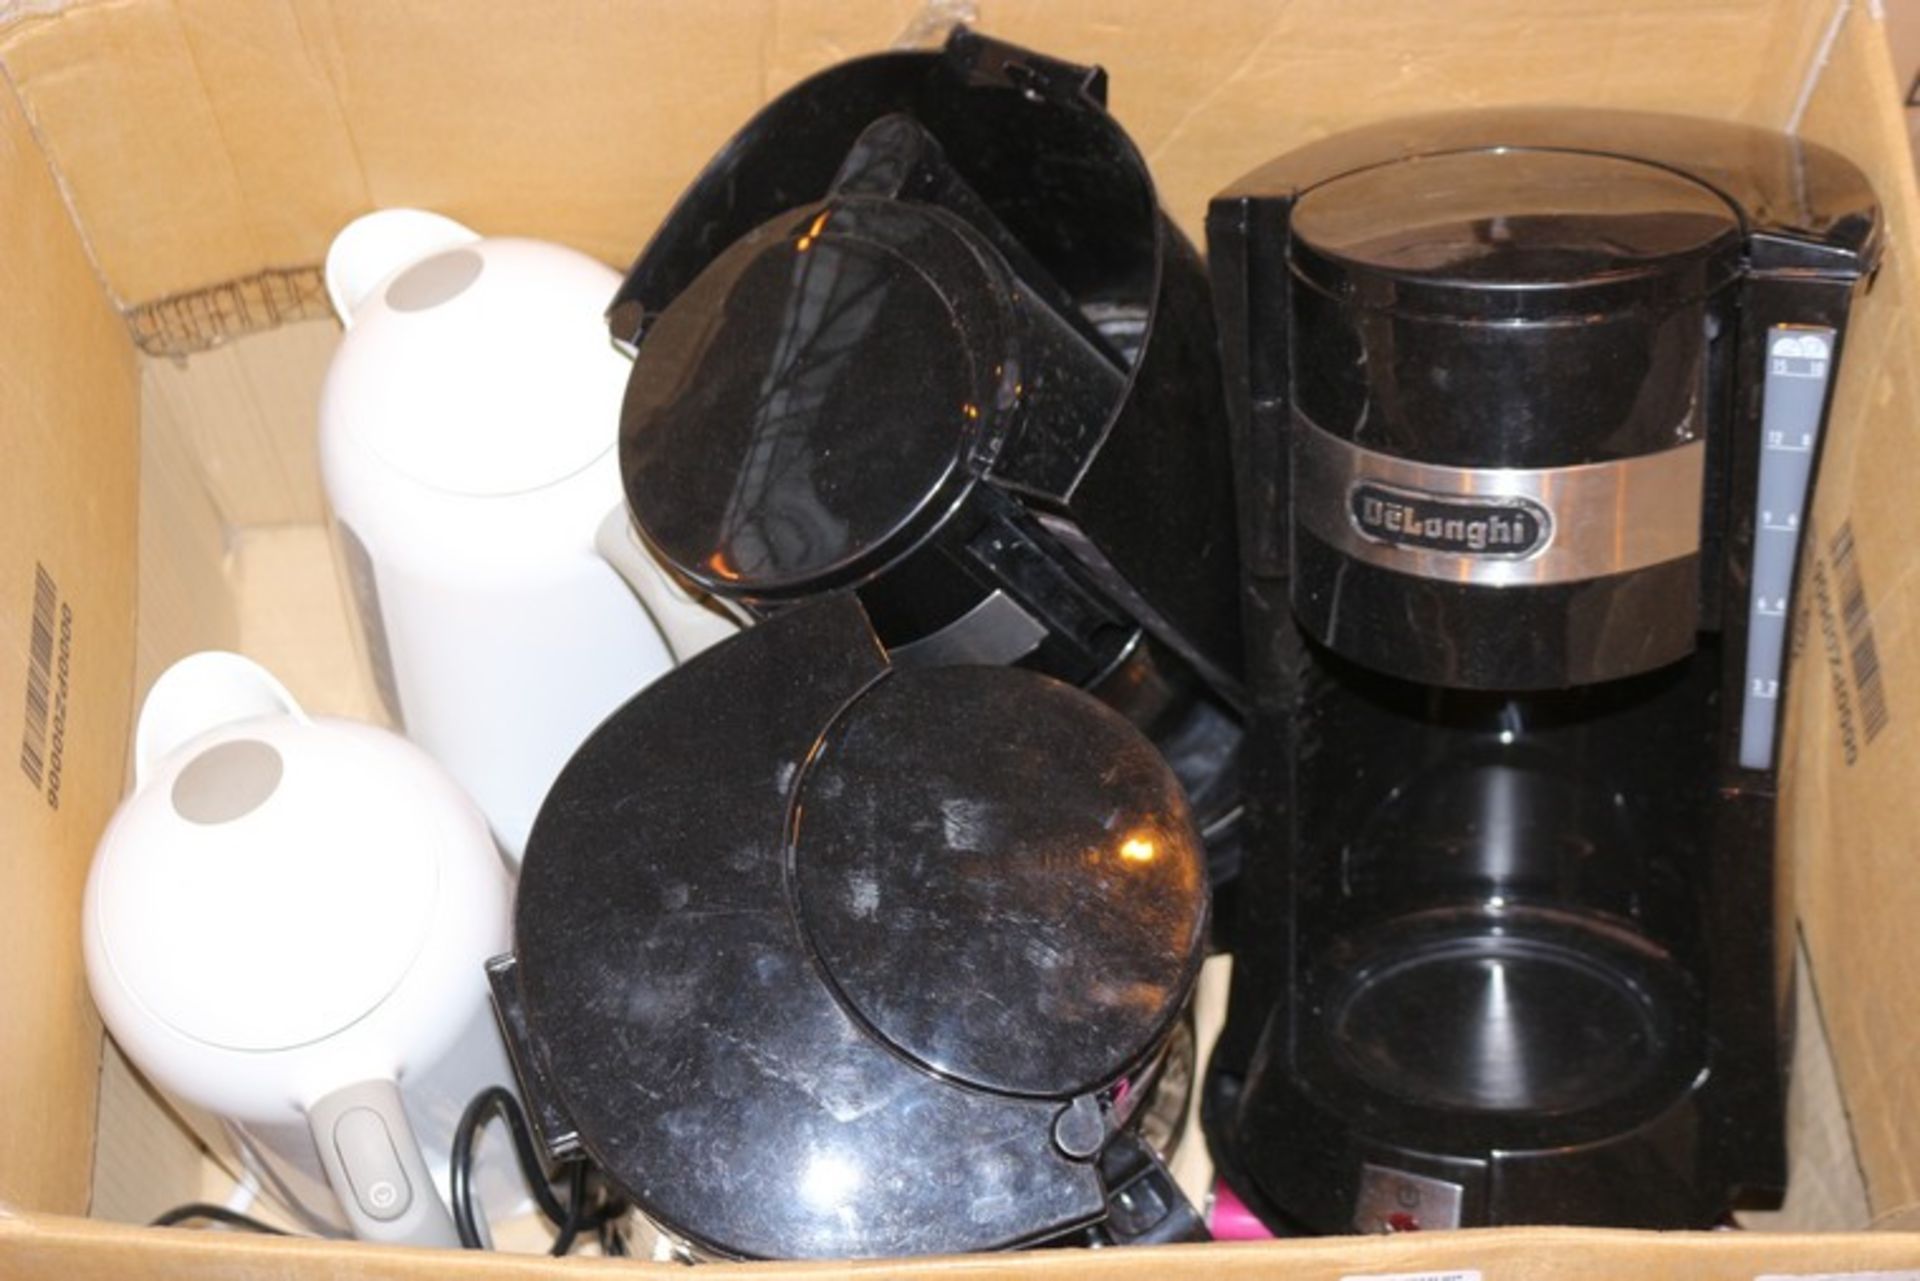 6 x ASSORTED ITEMS TO INCLUDE KENWOOD KETTLE, DELONGHI COFFEE MACHINE AND MUCH MORE (10.10.17) *